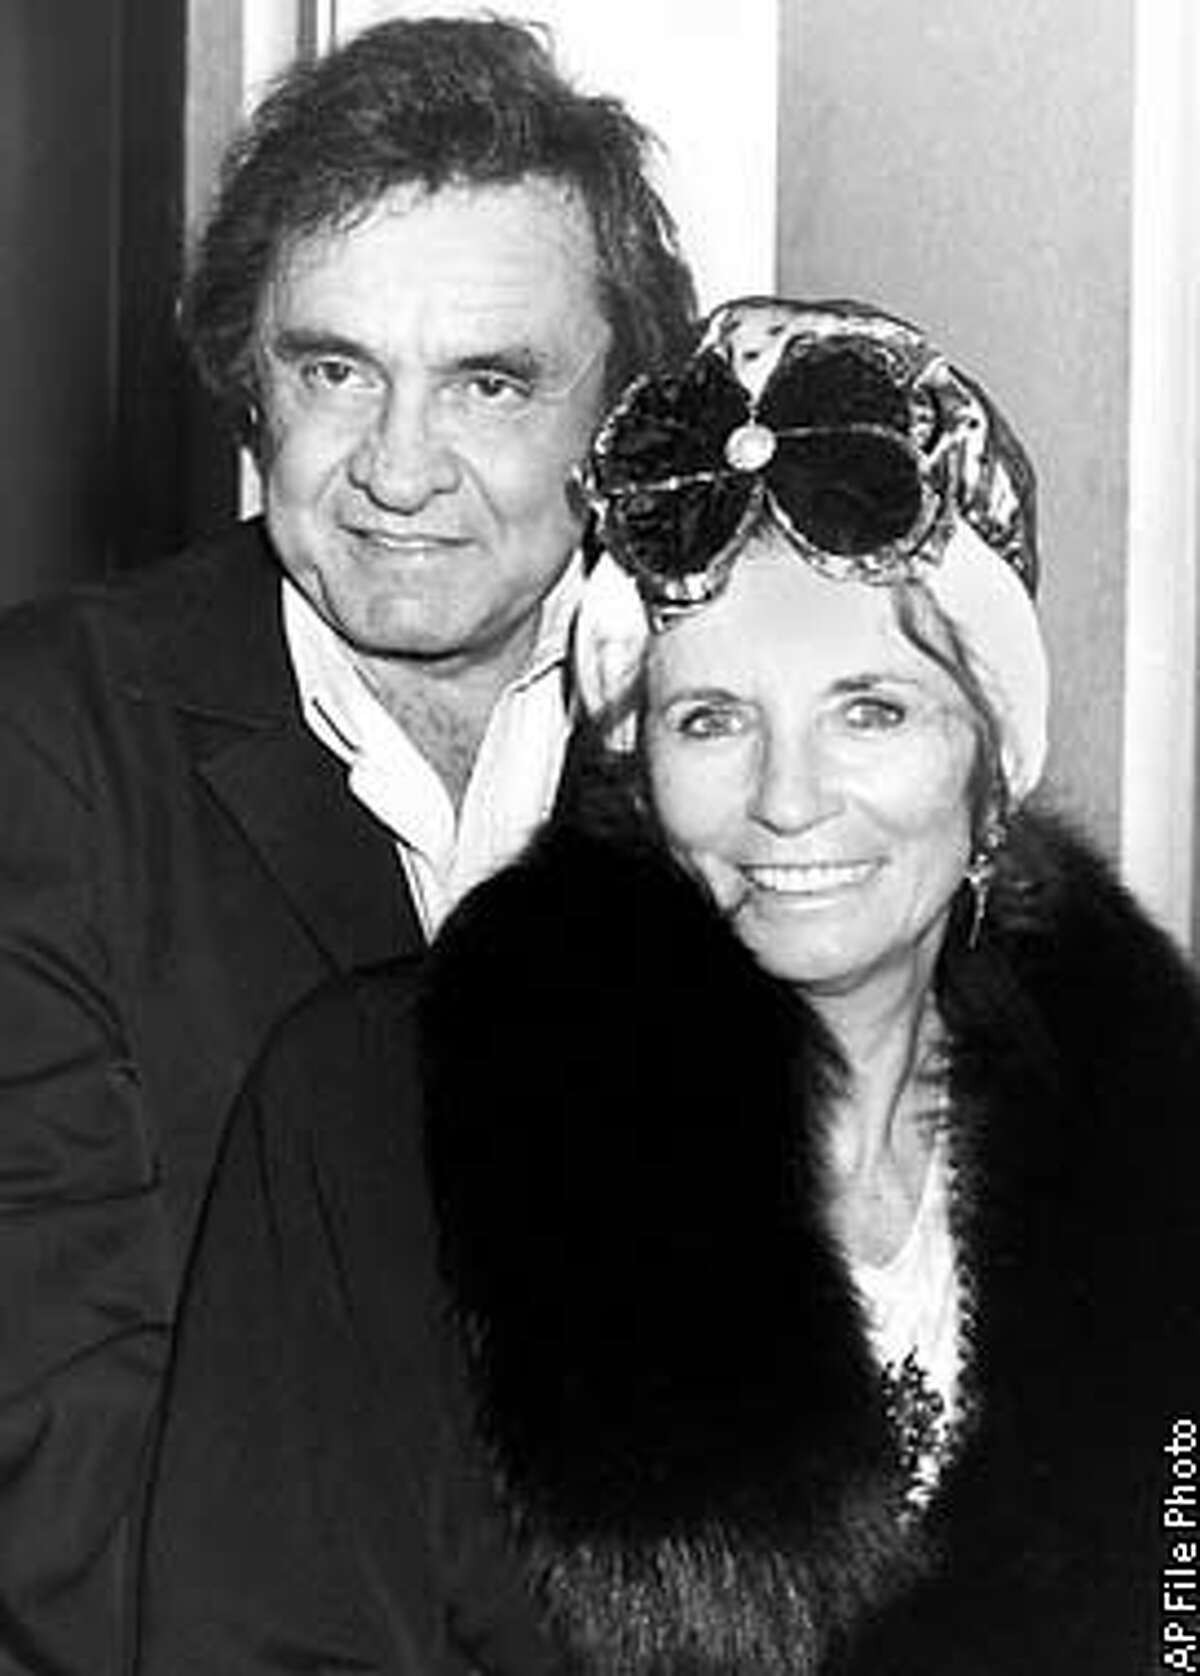 **FILE** June Carter Cash, is seen with her husband, country music legend Johny Cash in London in this April 29, 1988 file photo. June Carter Cash, the Grammy-winning scion of one of country music's pioneering families and the wife of country giant Johnny Cash, died Thursday, May 15, 2003 of complications from heart surgery. She was 73. (AP Photo/ File)